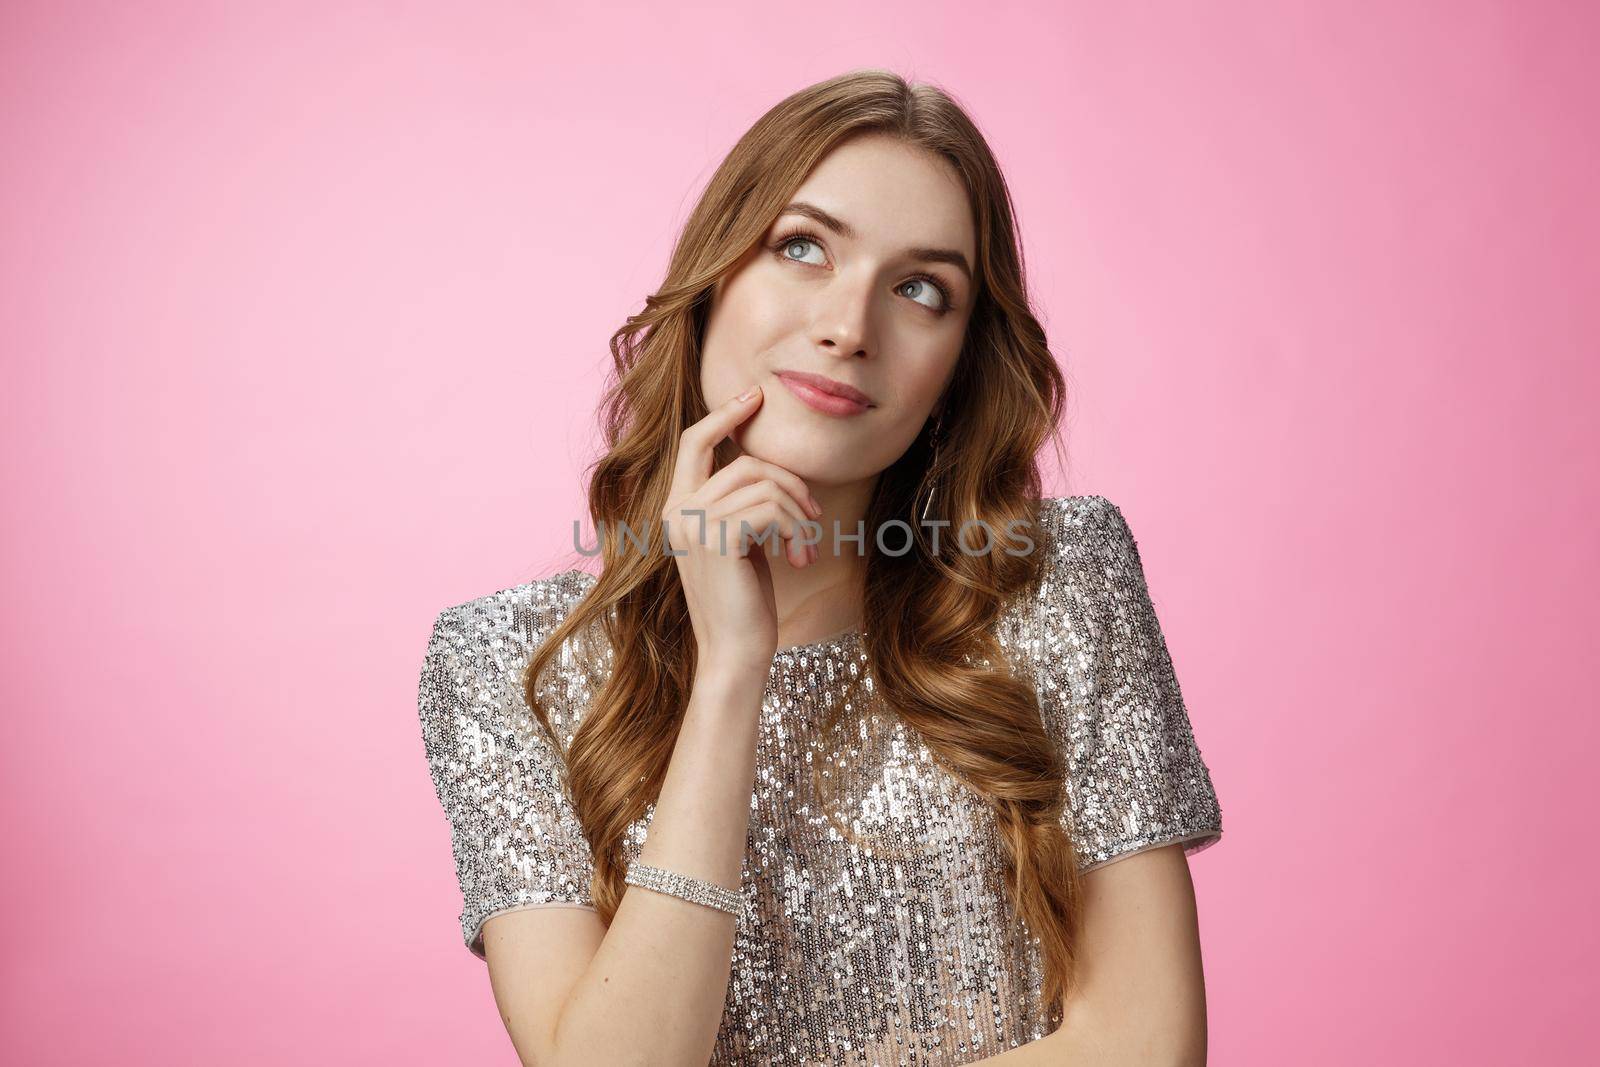 Dreamy cute glamour silly woman deciding what order look up thoughtful touching face thinking making decision choice imaging prince on white horse, smiling carefree pink background.